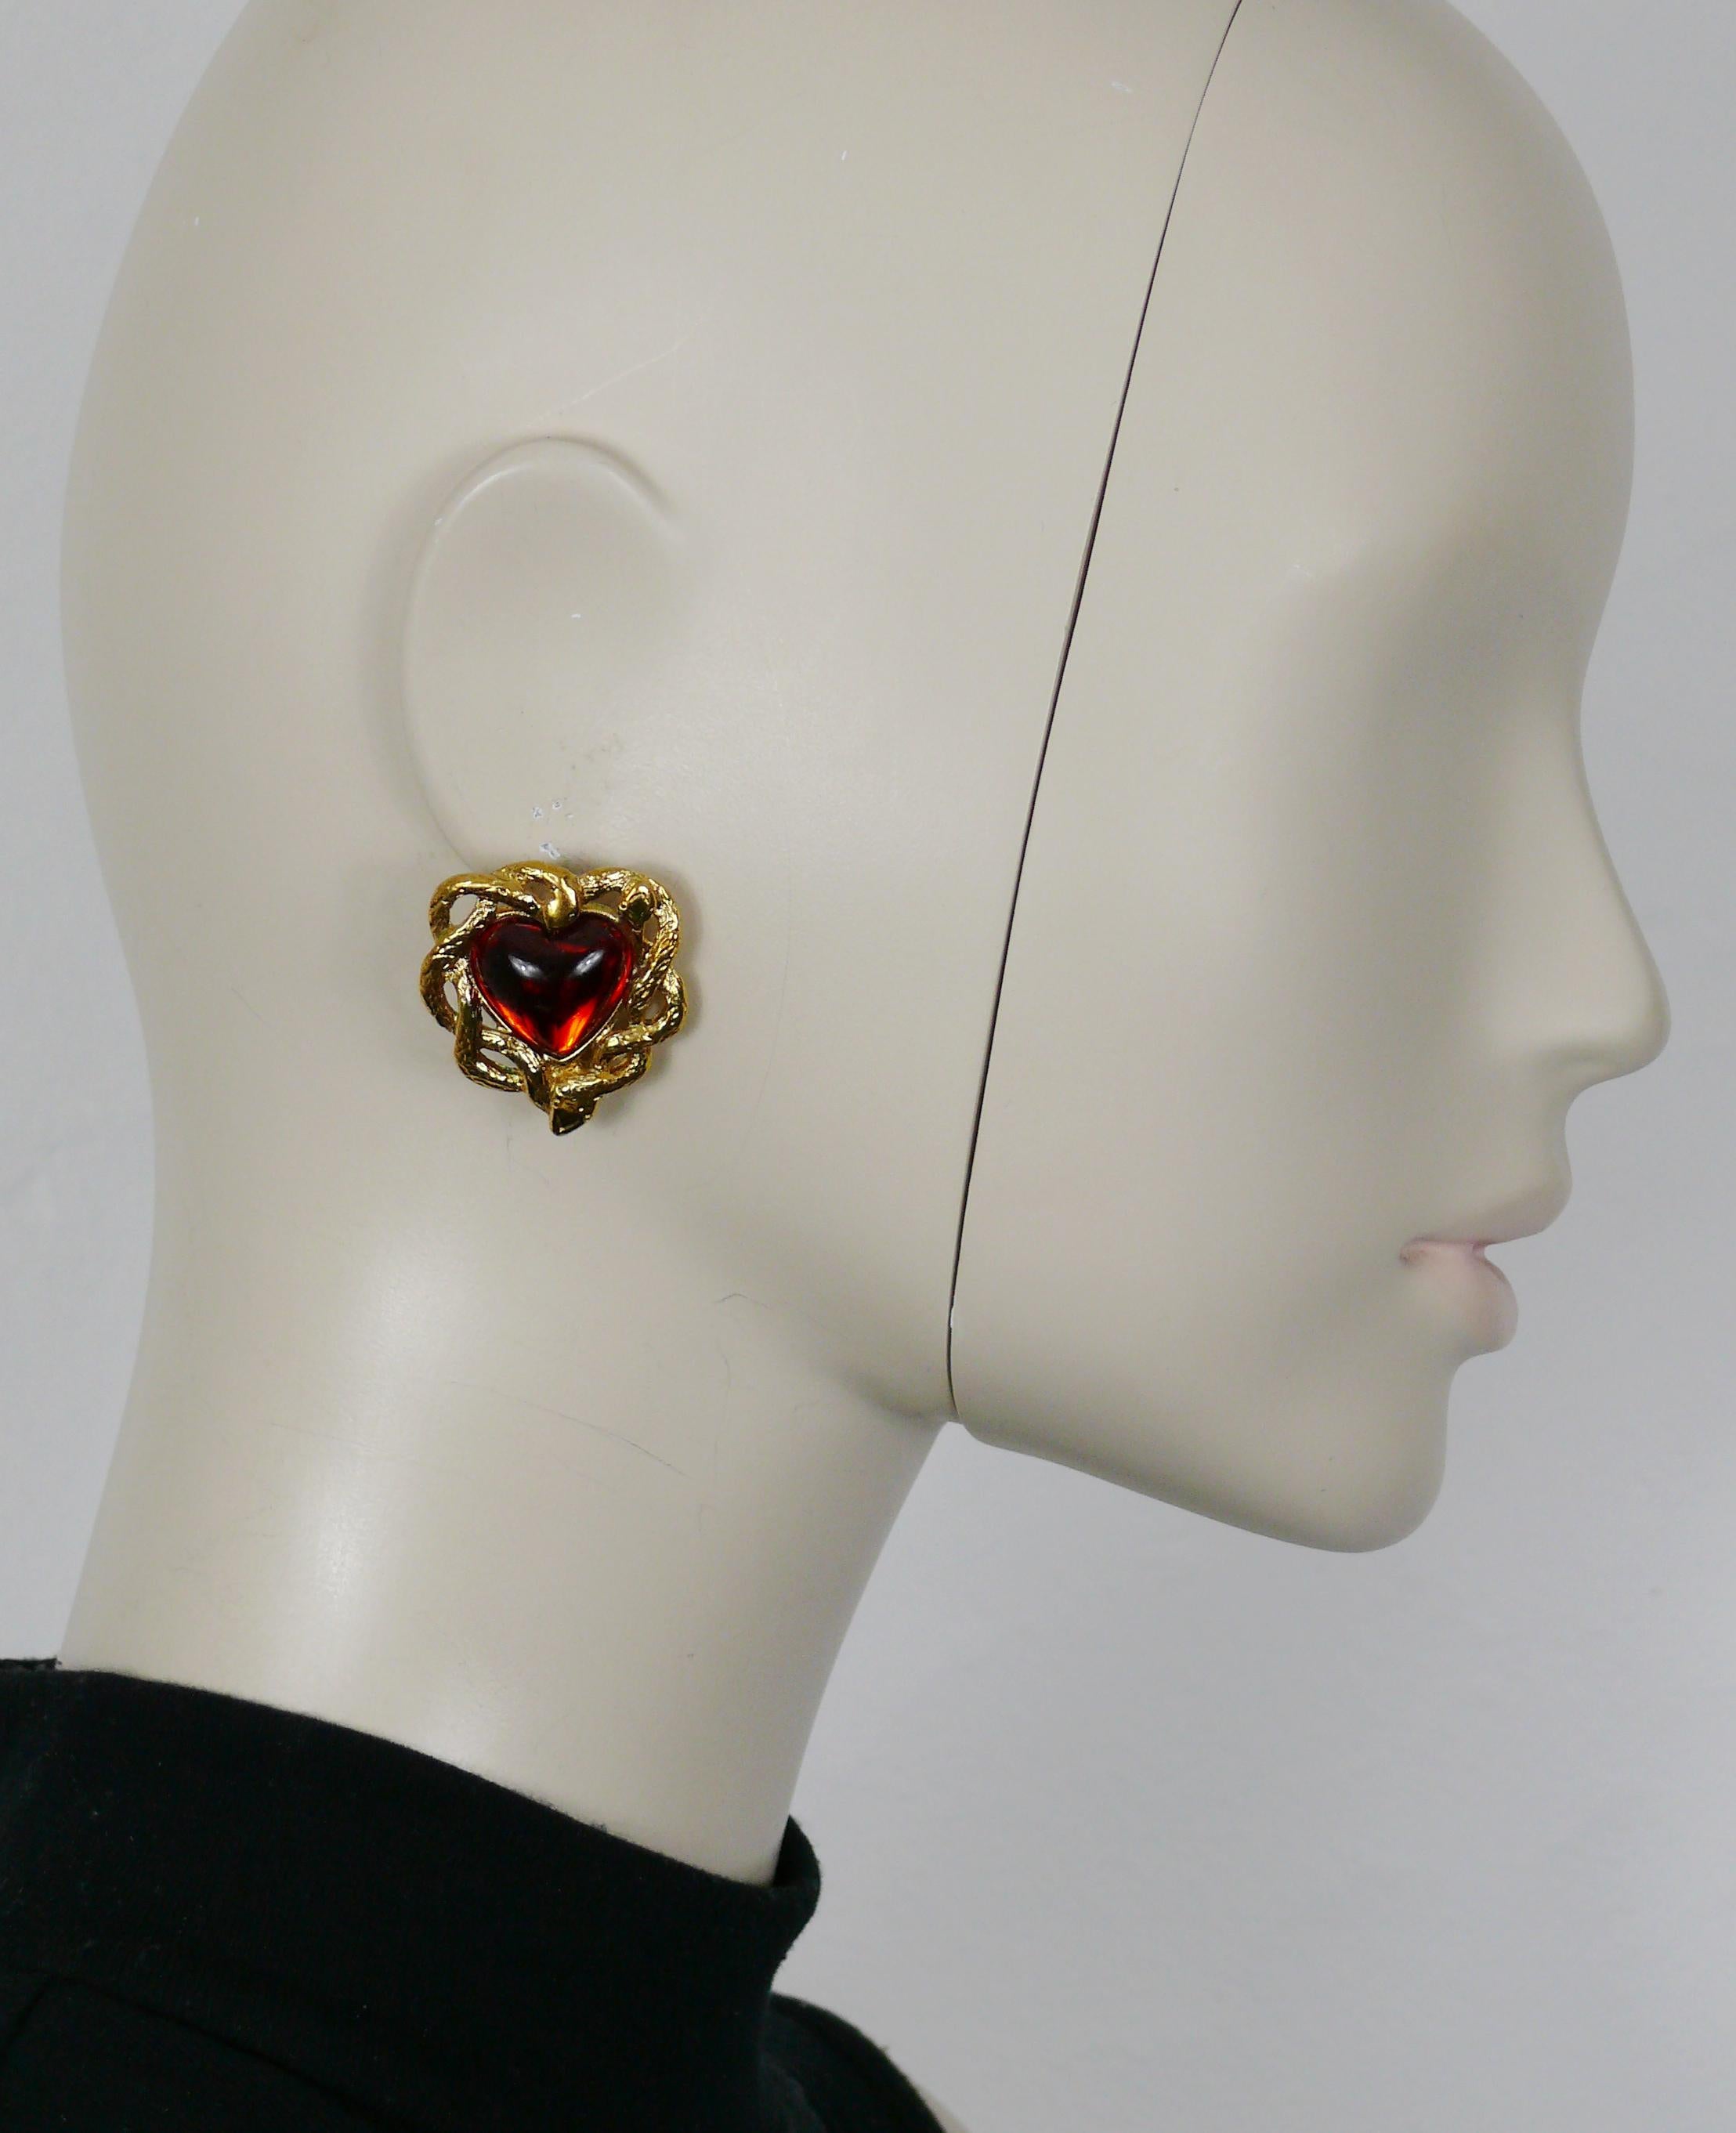 YVES SAINT LAURENT vintage gold tone clip-on earrings featuring coiled snakes/serpents embellished with red resin heart cabochon at the center.

Embossed YSL Made in France.

Indicative measurements : max. height approx. 3.3 cm (1.30 inches) / max.